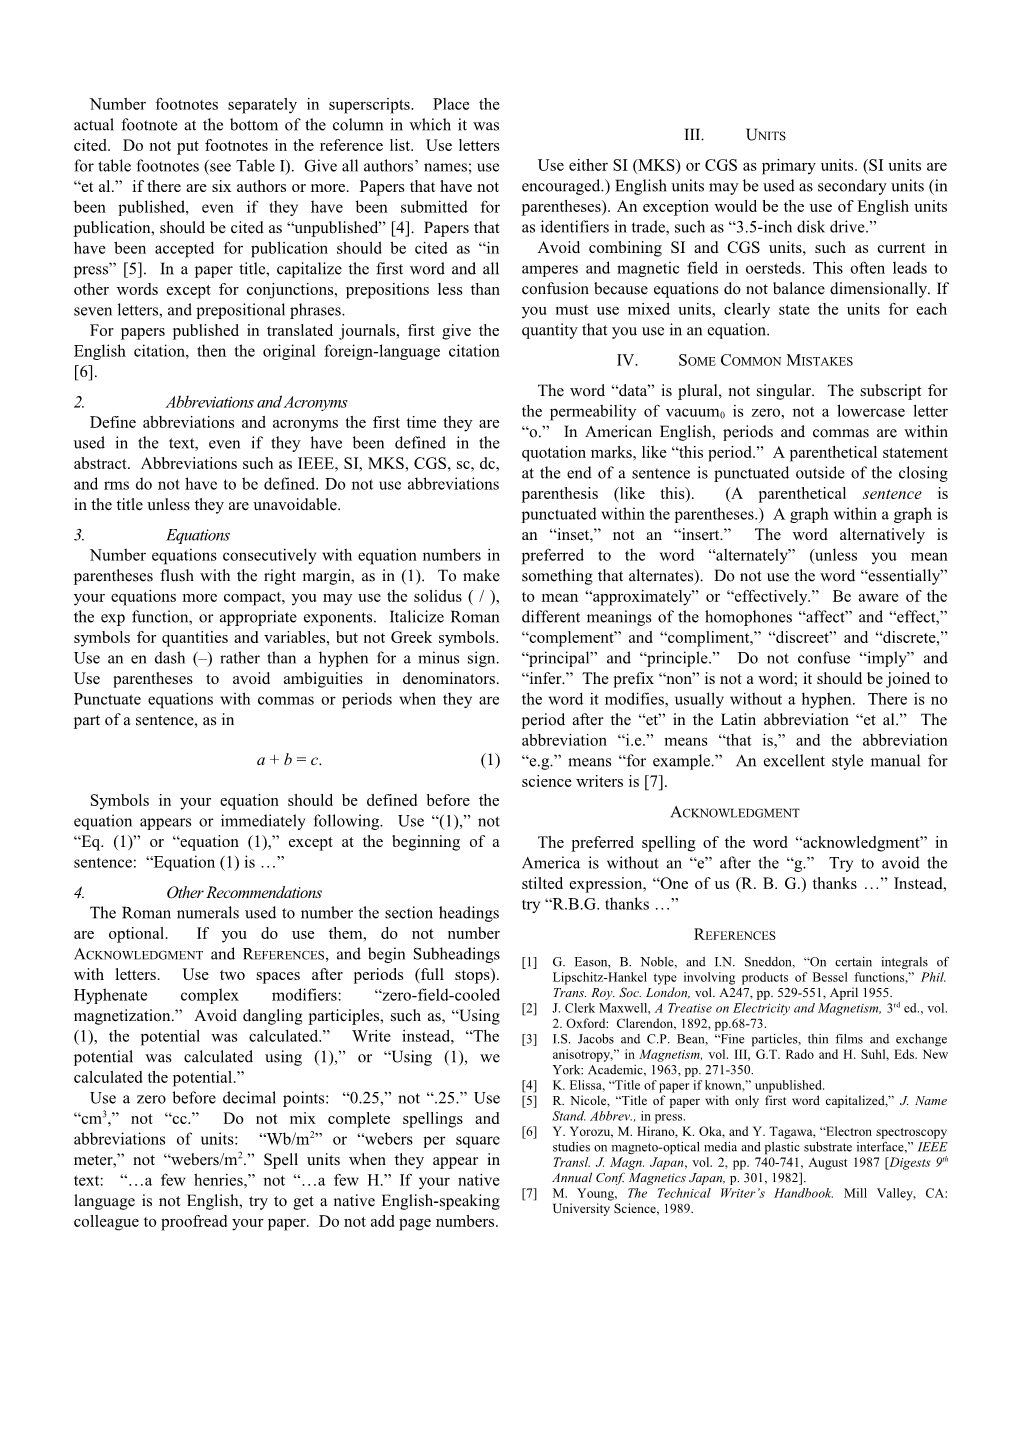 Preparation of Papers in Two-Column Format for the Proceedings of the 2004 Sarnoff Symposium